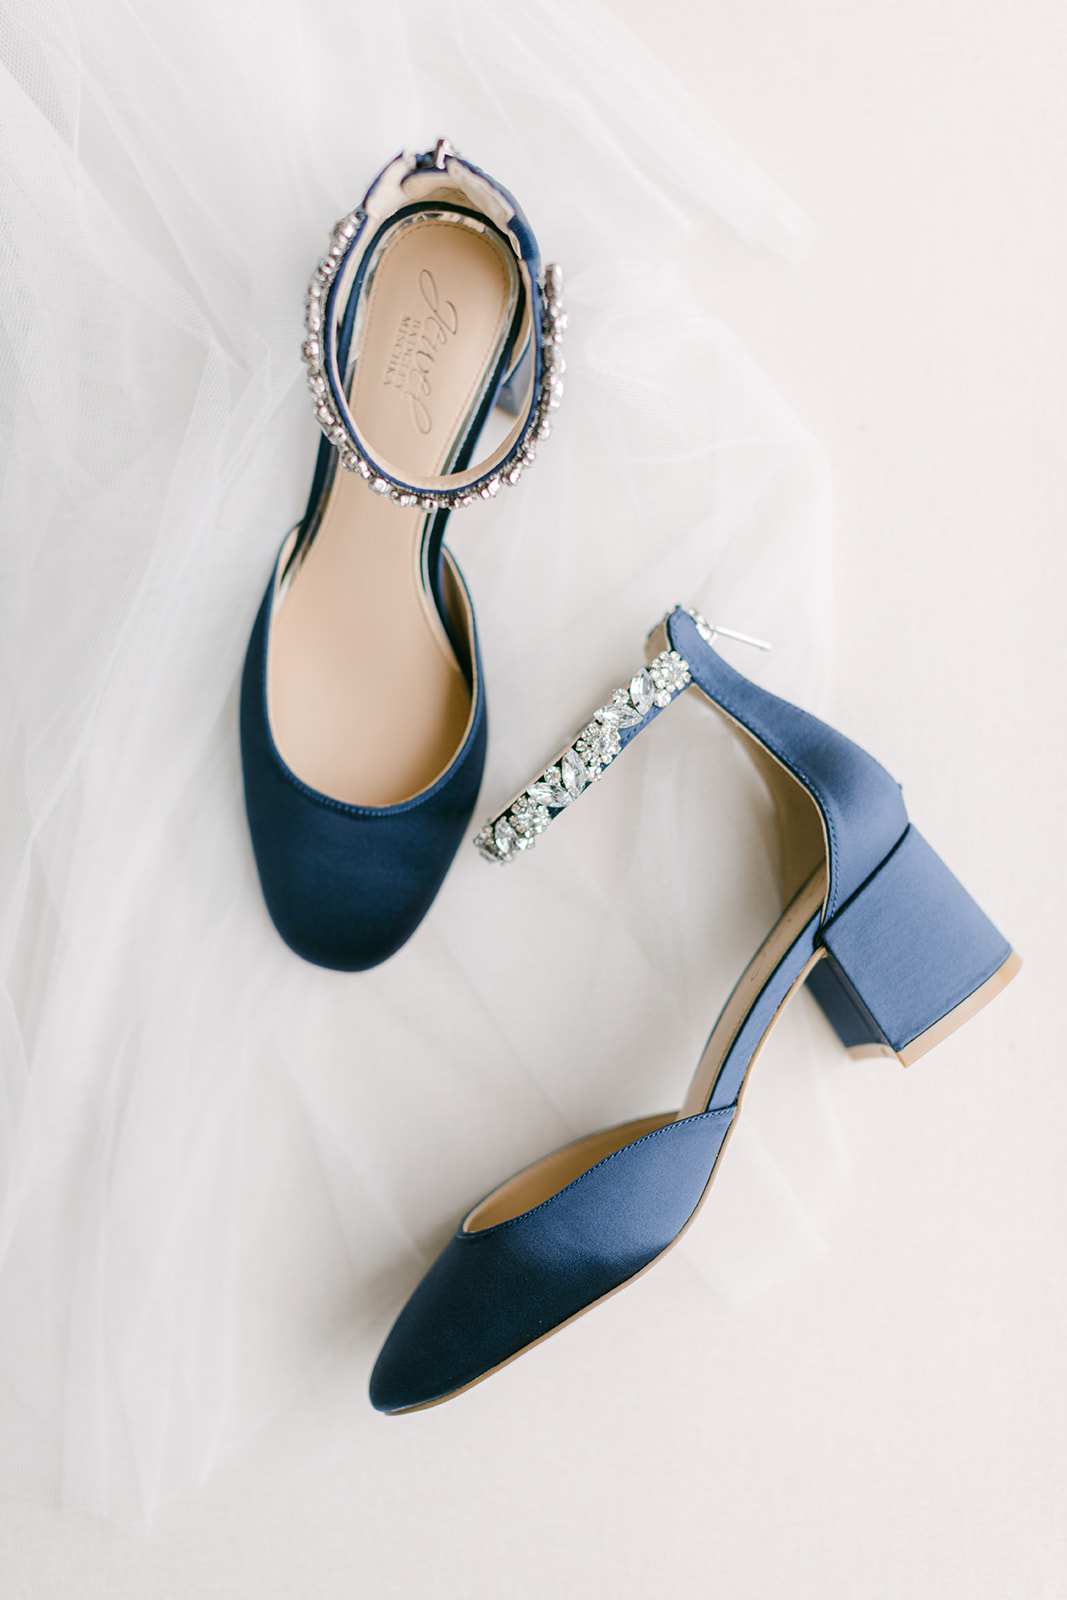 wedding flat lays of shoes at glen manor